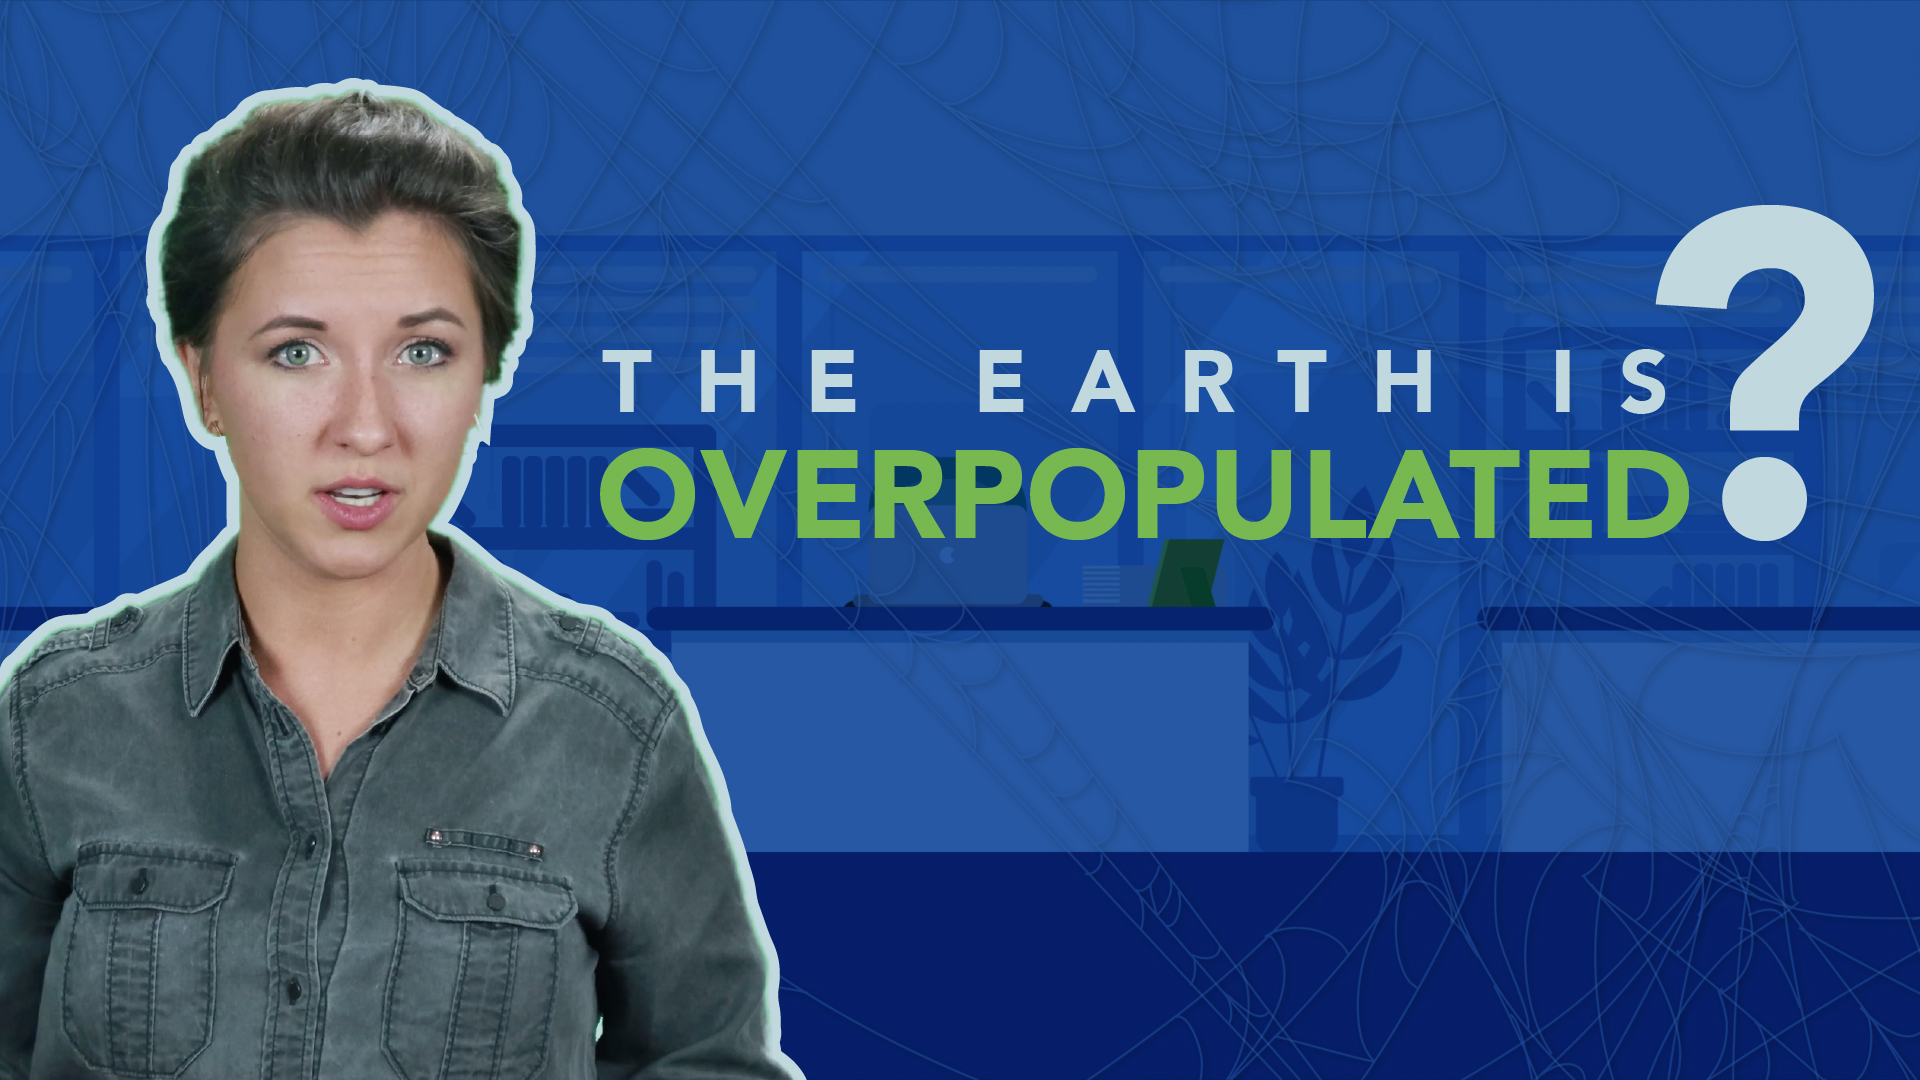 Should We Panic About Overpopulation?